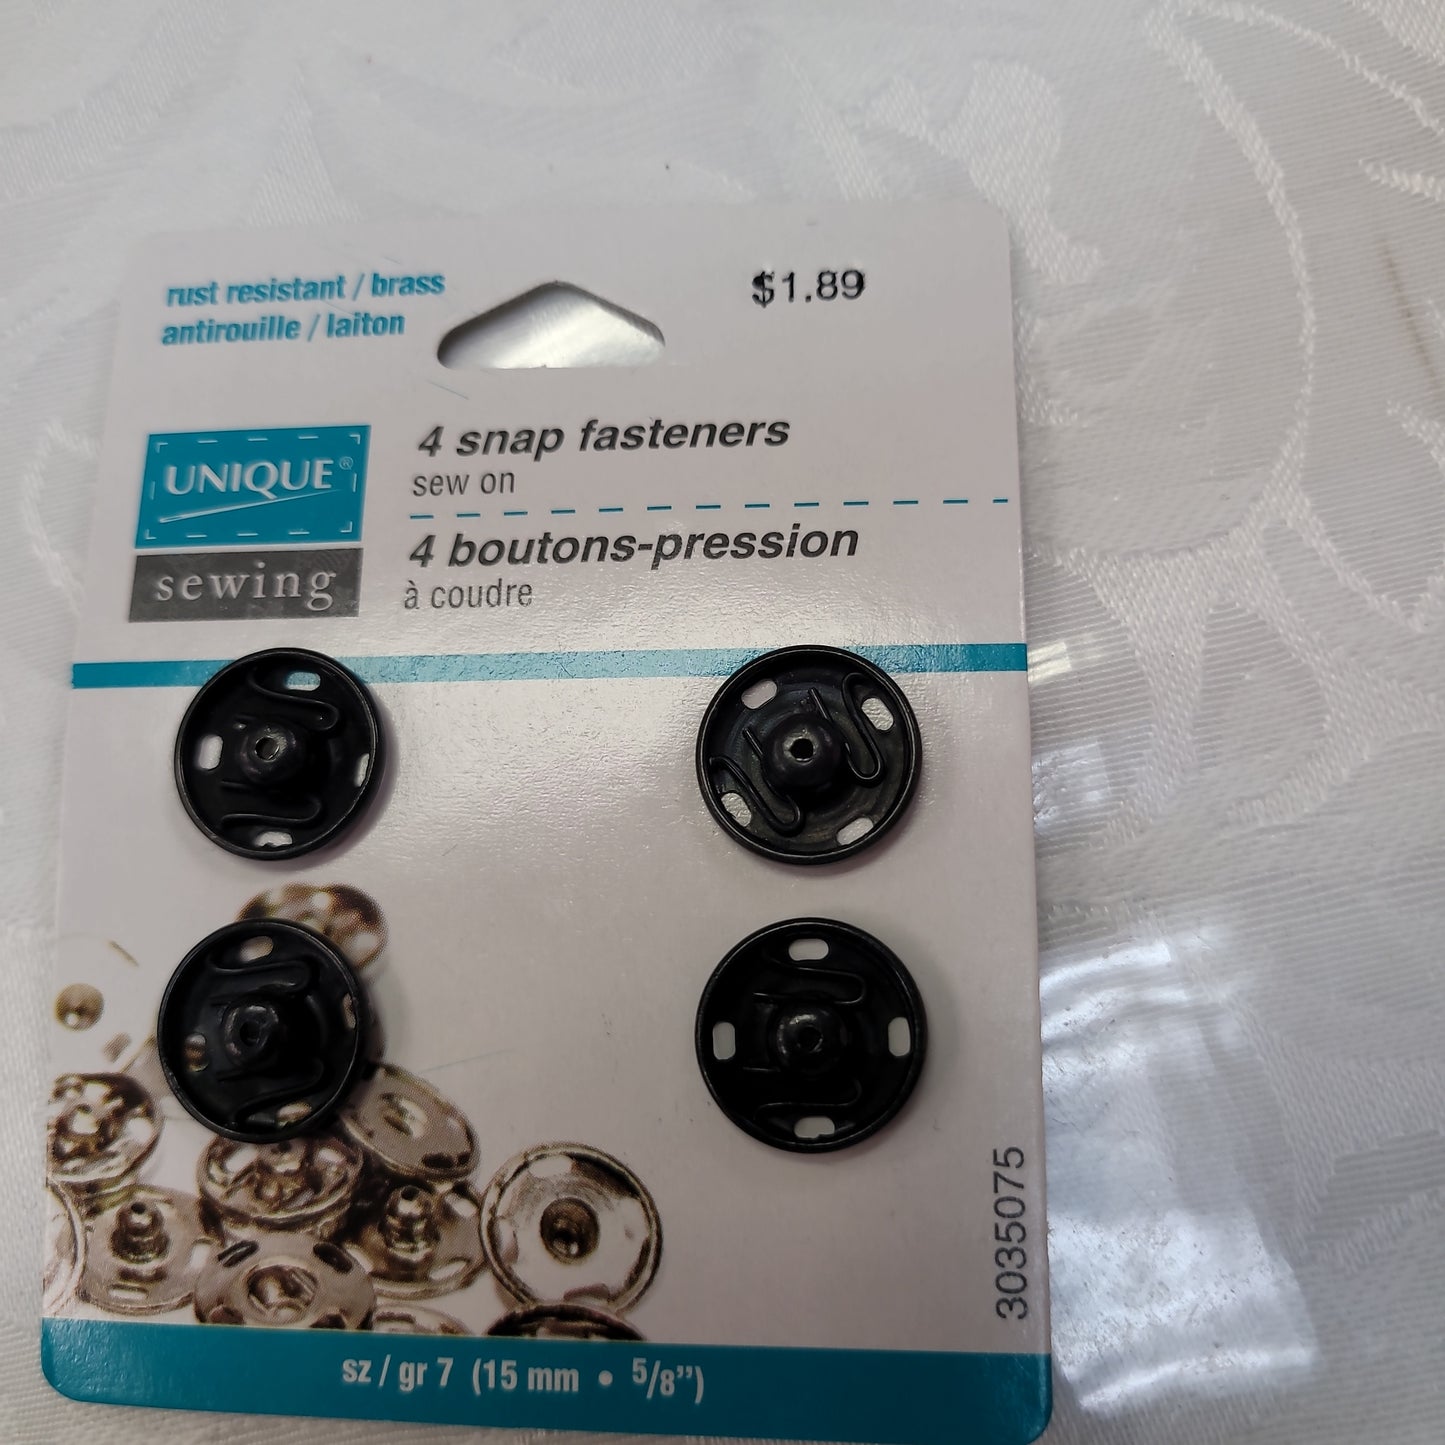 UNIQUE SEWING Snap Fasteners Black - size 7 / 15mm (5⁄8″) - 4 sets